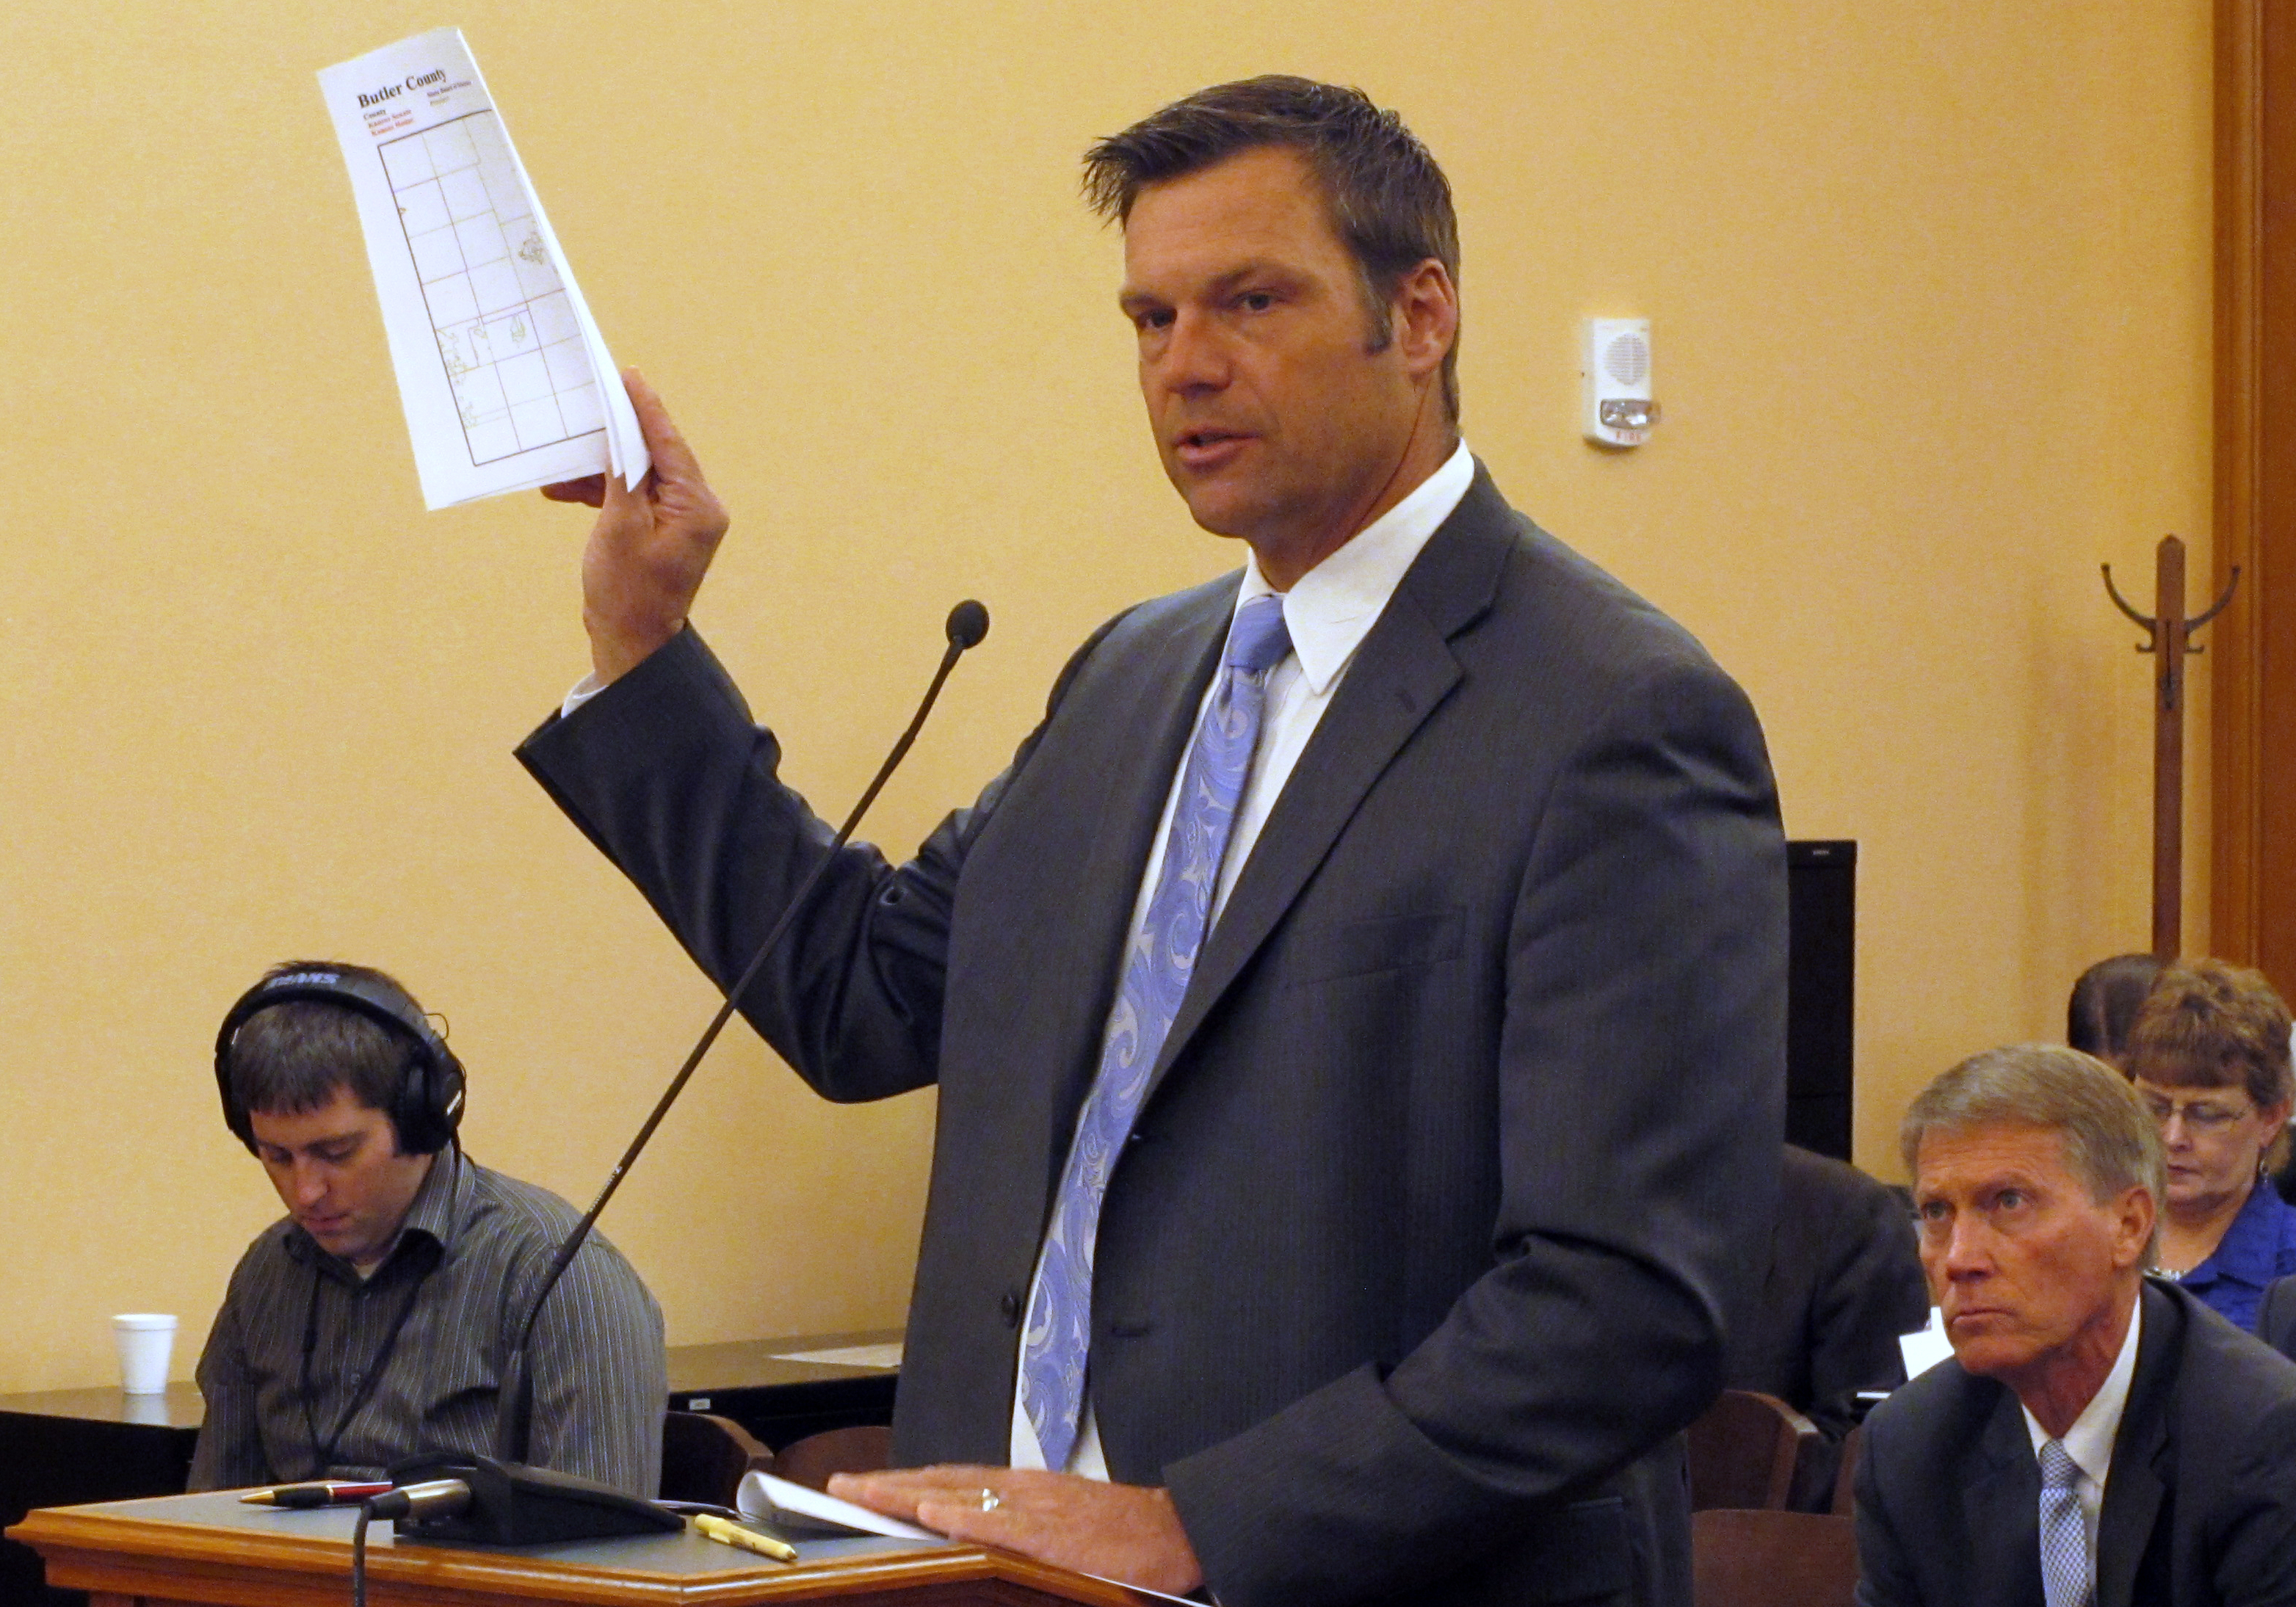 Kansas Secretary of State Kris Kobach testifies during a meeting of a legislative study committee on election issues, Friday, Nov. 21, 2014, at the Statehouse in Topeka, Kan. Kobach says he'll revive a proposal to allow his office to prosecute election fraud cases. (AP Photo/John Hanna)